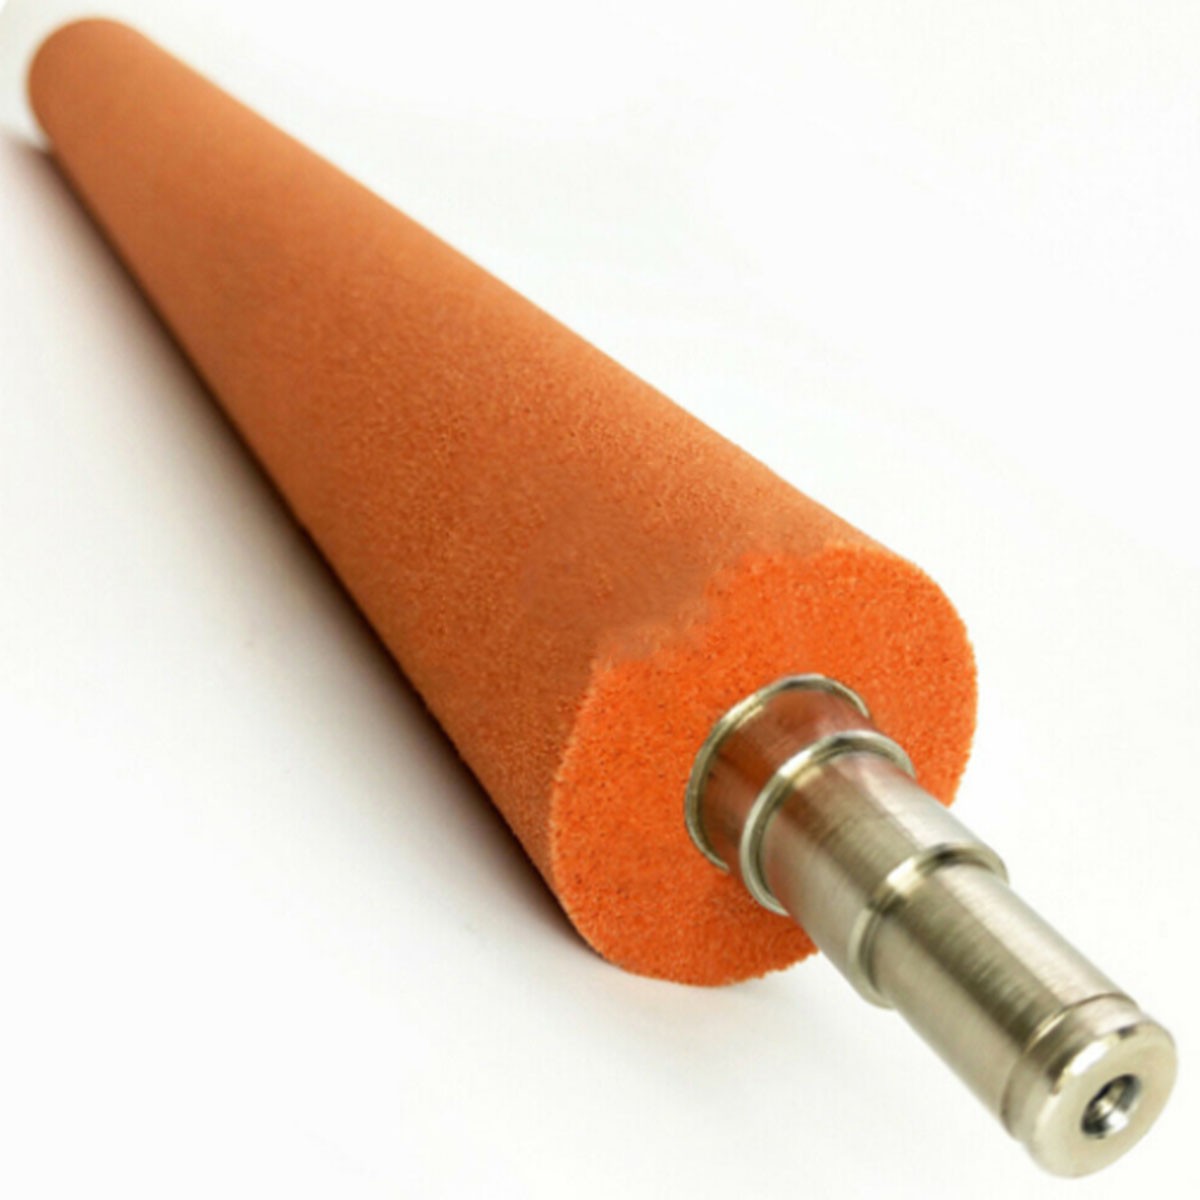 New Fuser Roller For Ricoh MPC C4500 C3500 C811 Red sponge rolle